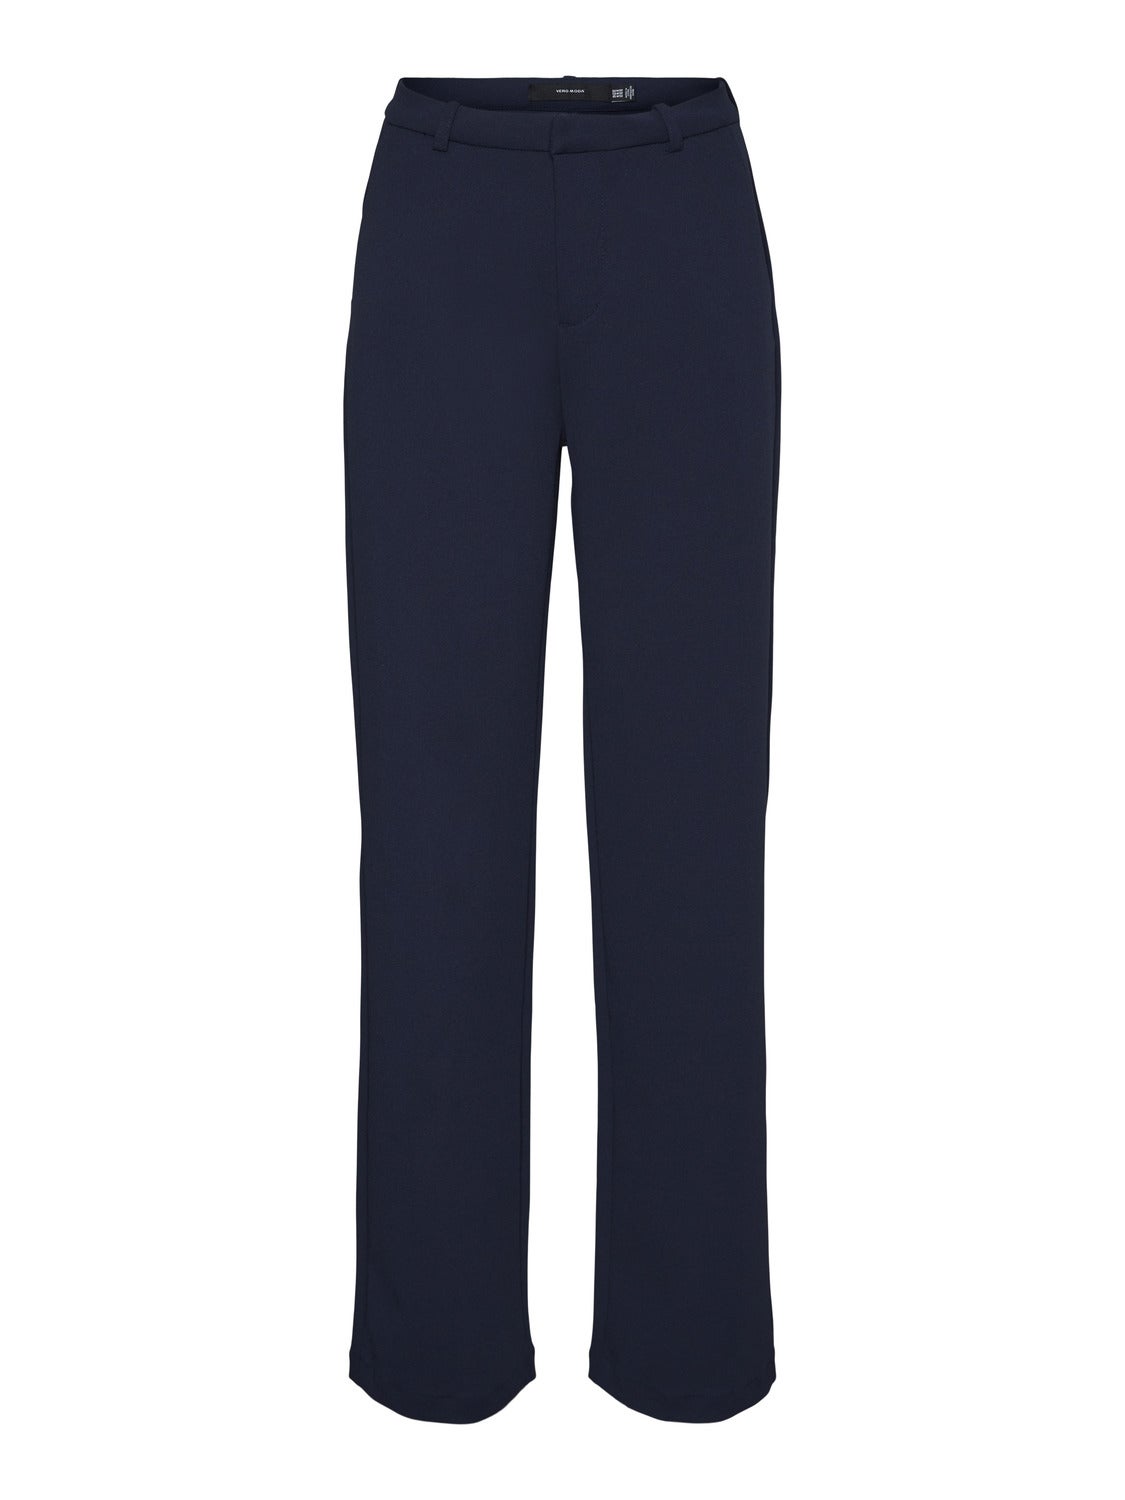 Womens Tall Trousers | Tall Wide Leg Trousers | New Look